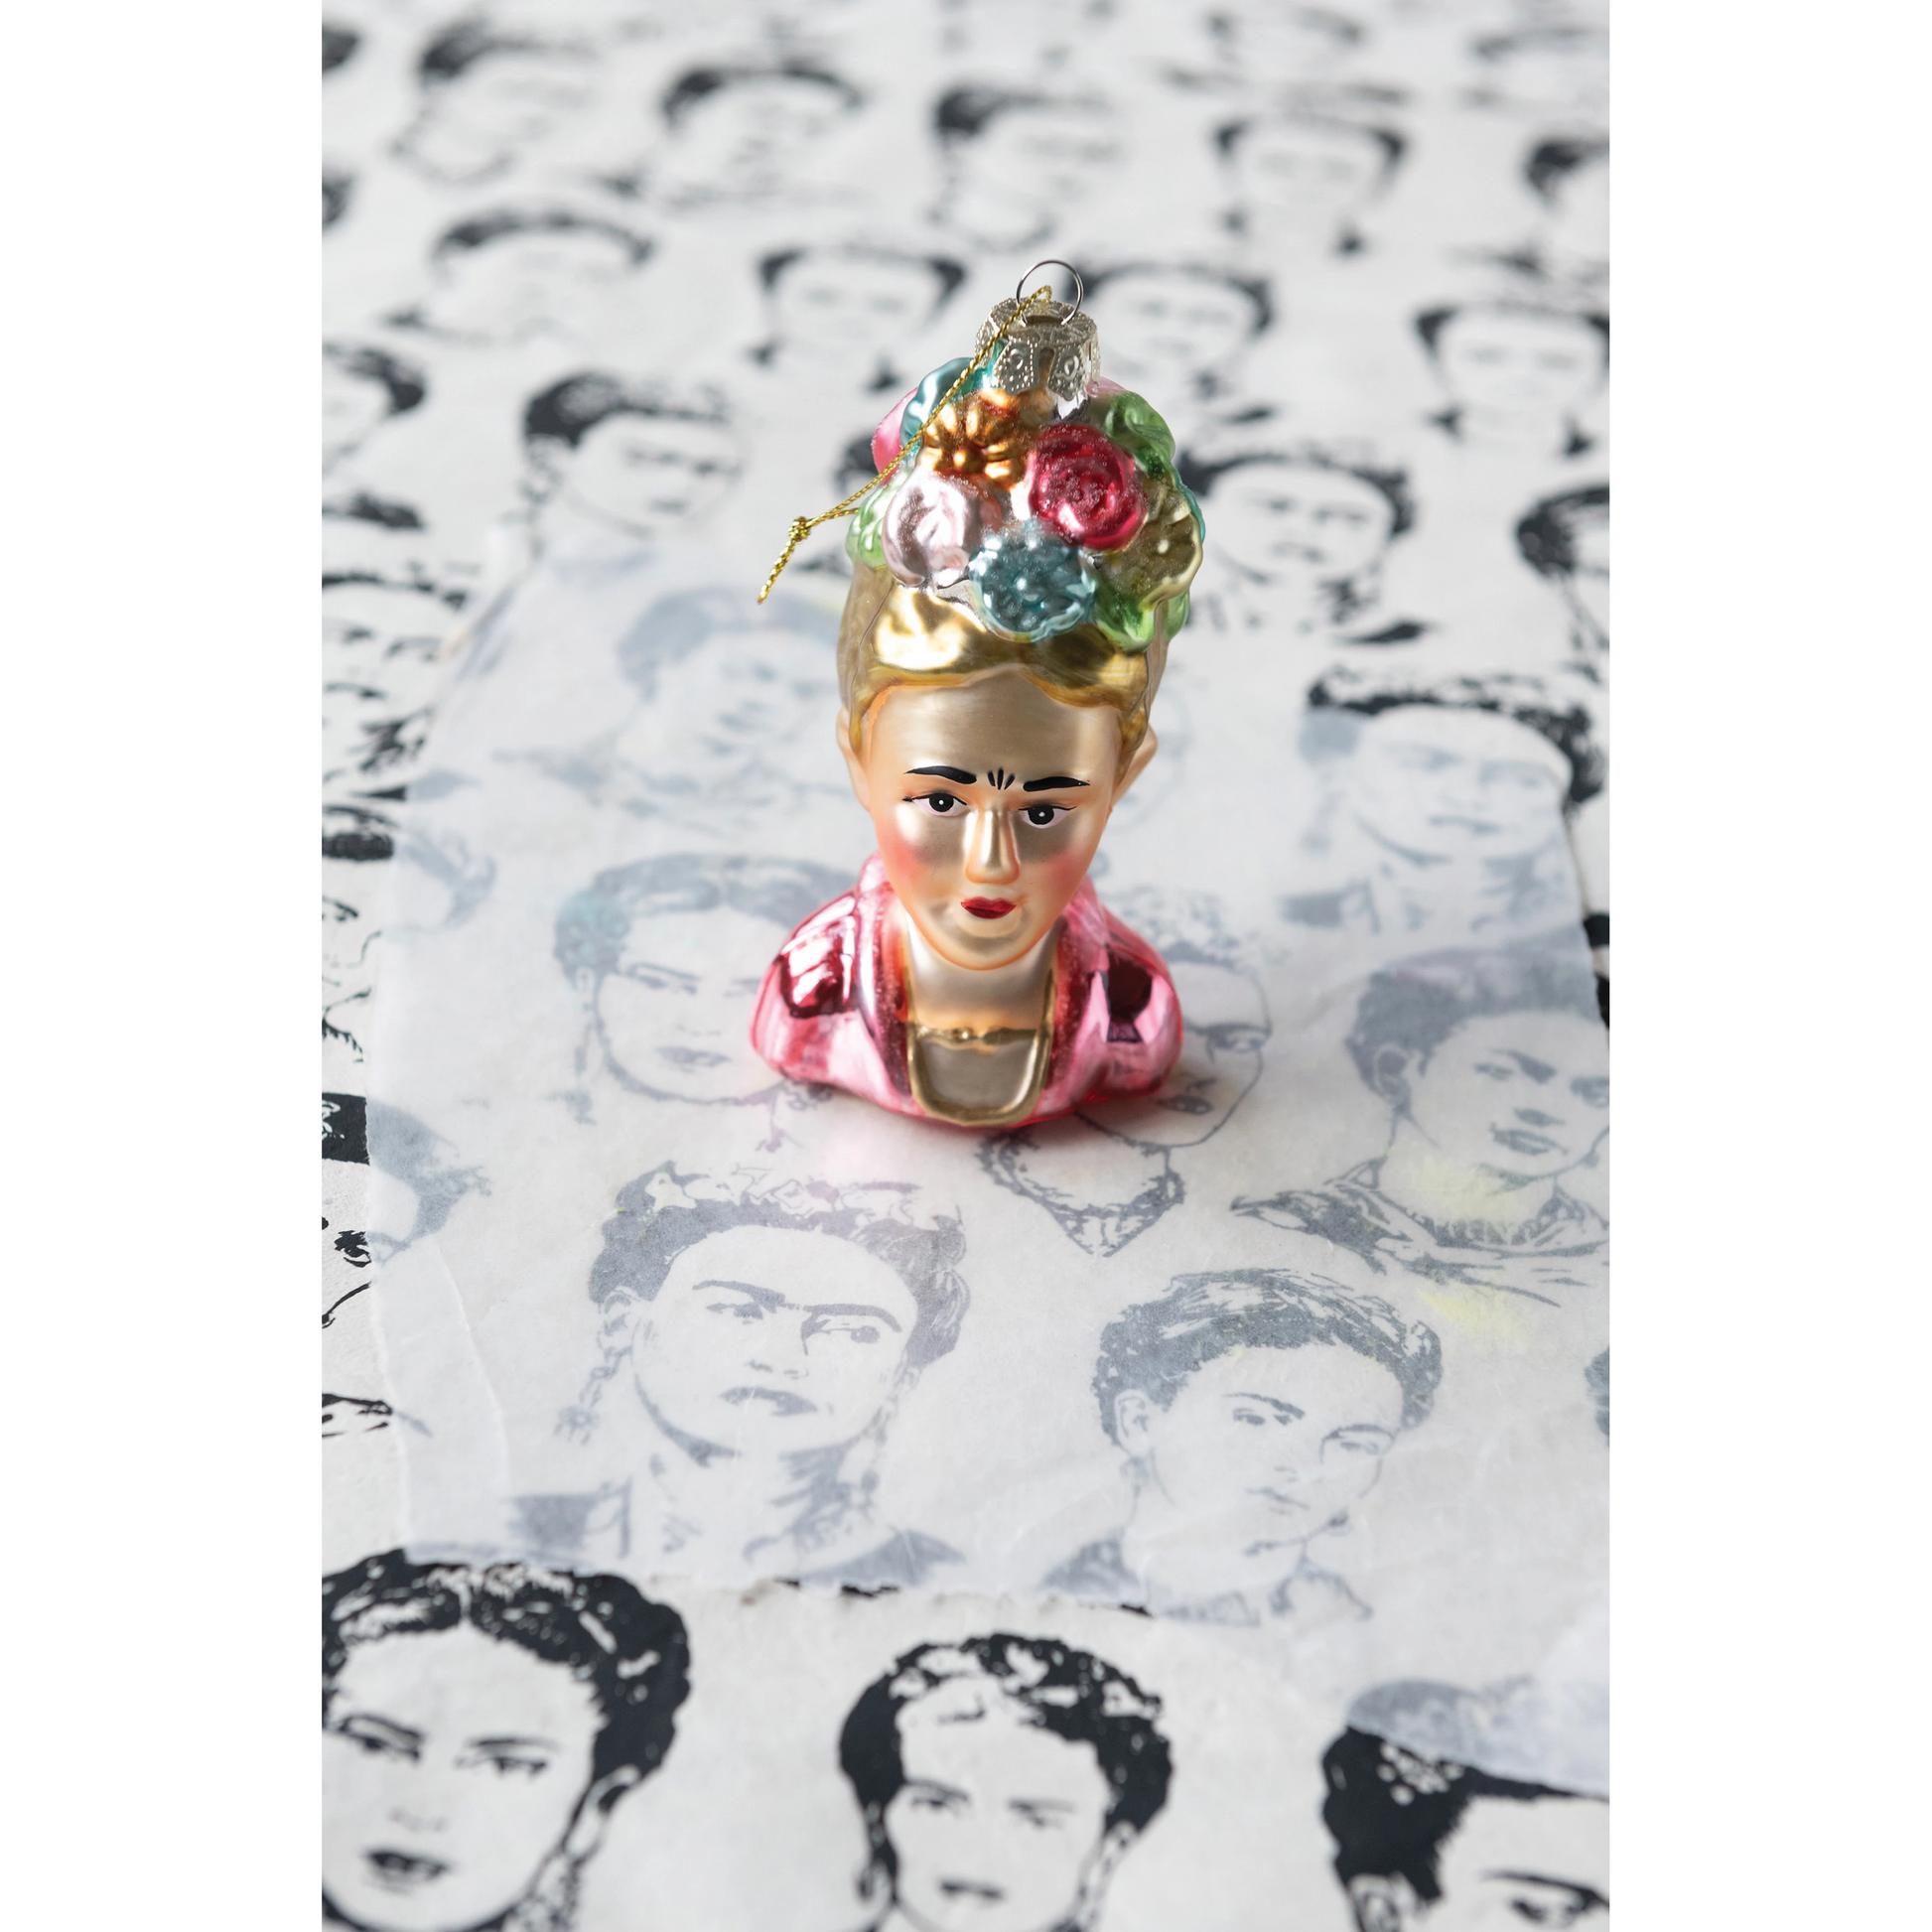 Hand-Painted Glass Frida Kahlo Ornament - 4-1/4-in - Mellow Monkey